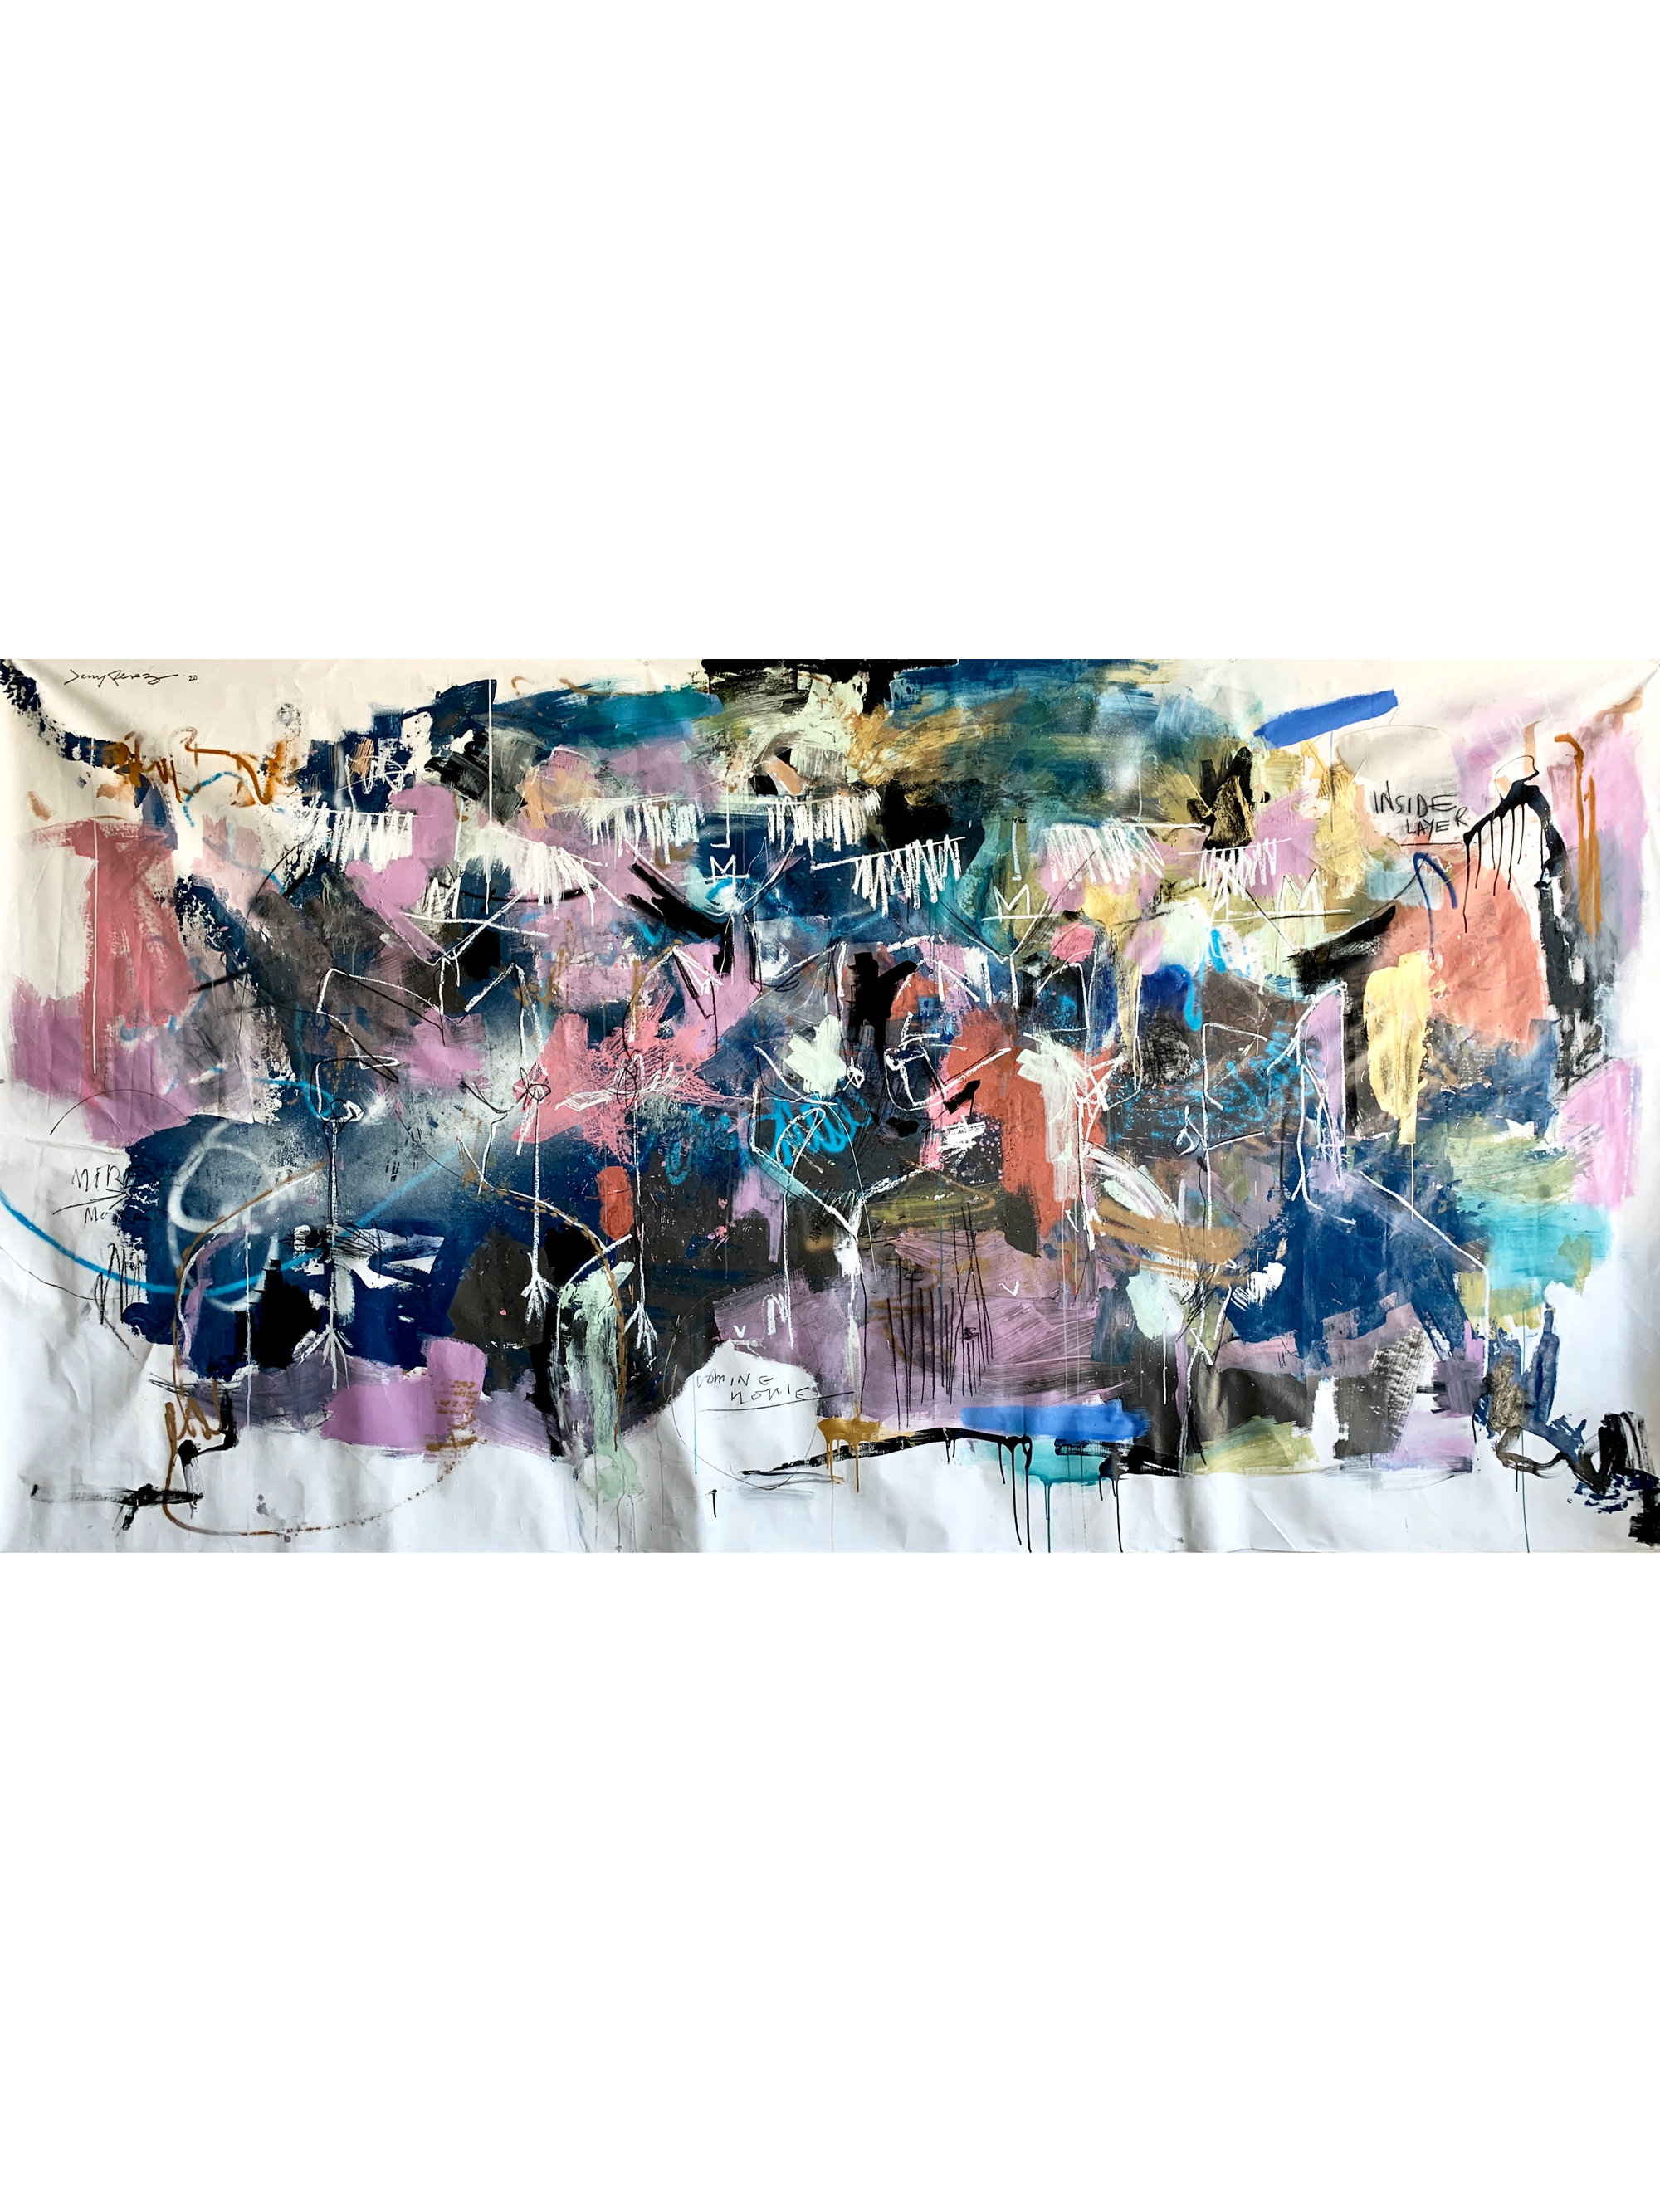 Coming Home 7' x 9' - 2020 - Acrylic, aerosol and charcoal on canvas